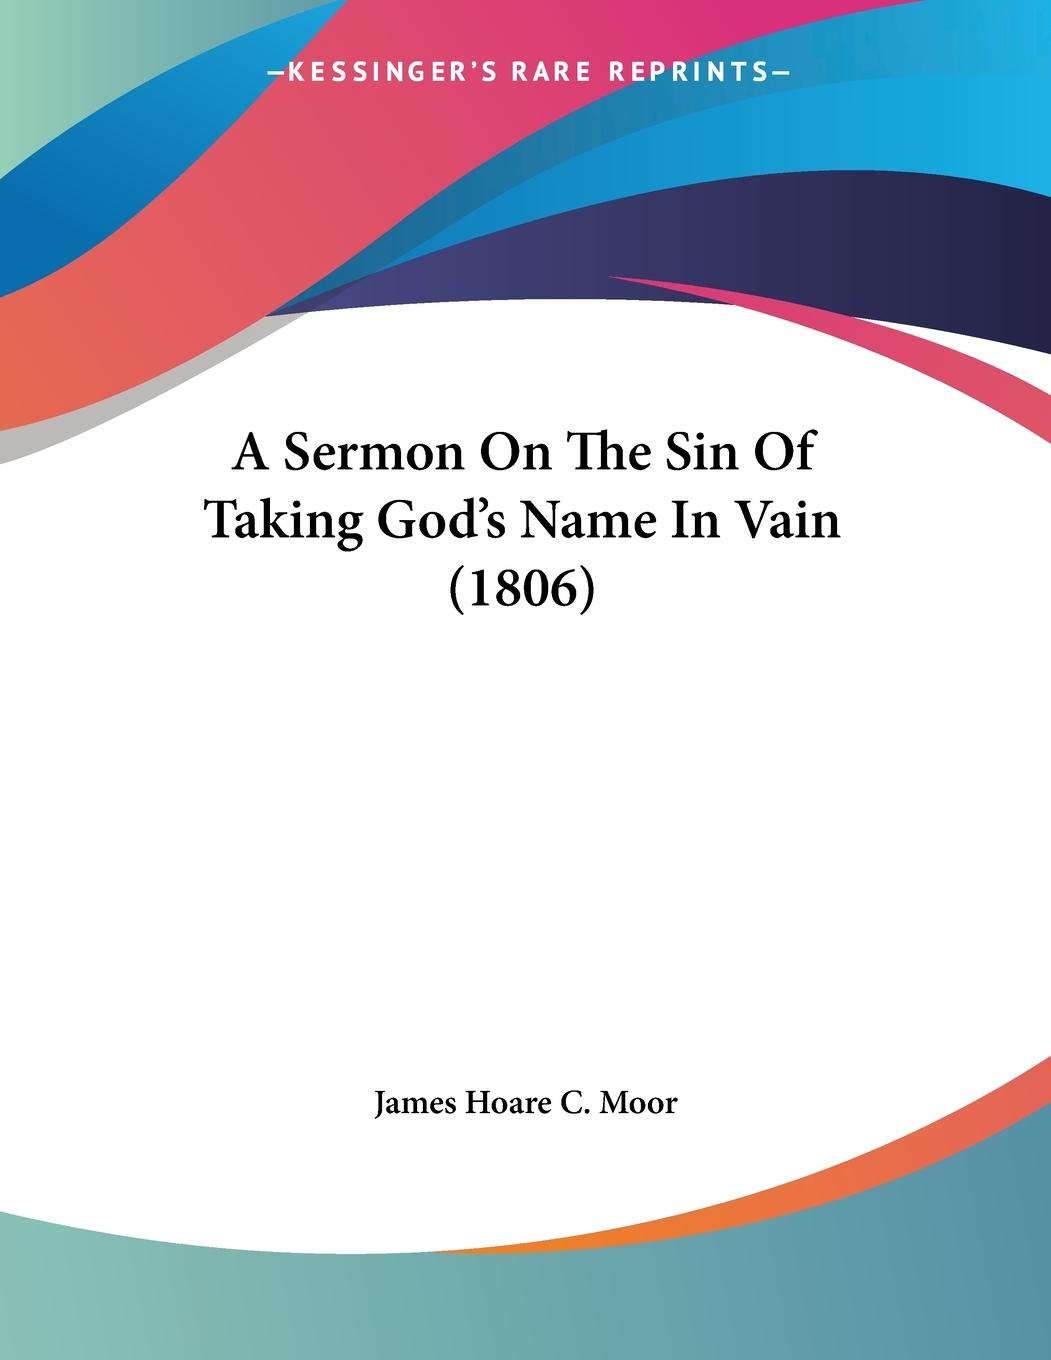 A Sermon On The Sin Of Taking God s Name In Vain (1806) - Moor, James Hoare C.